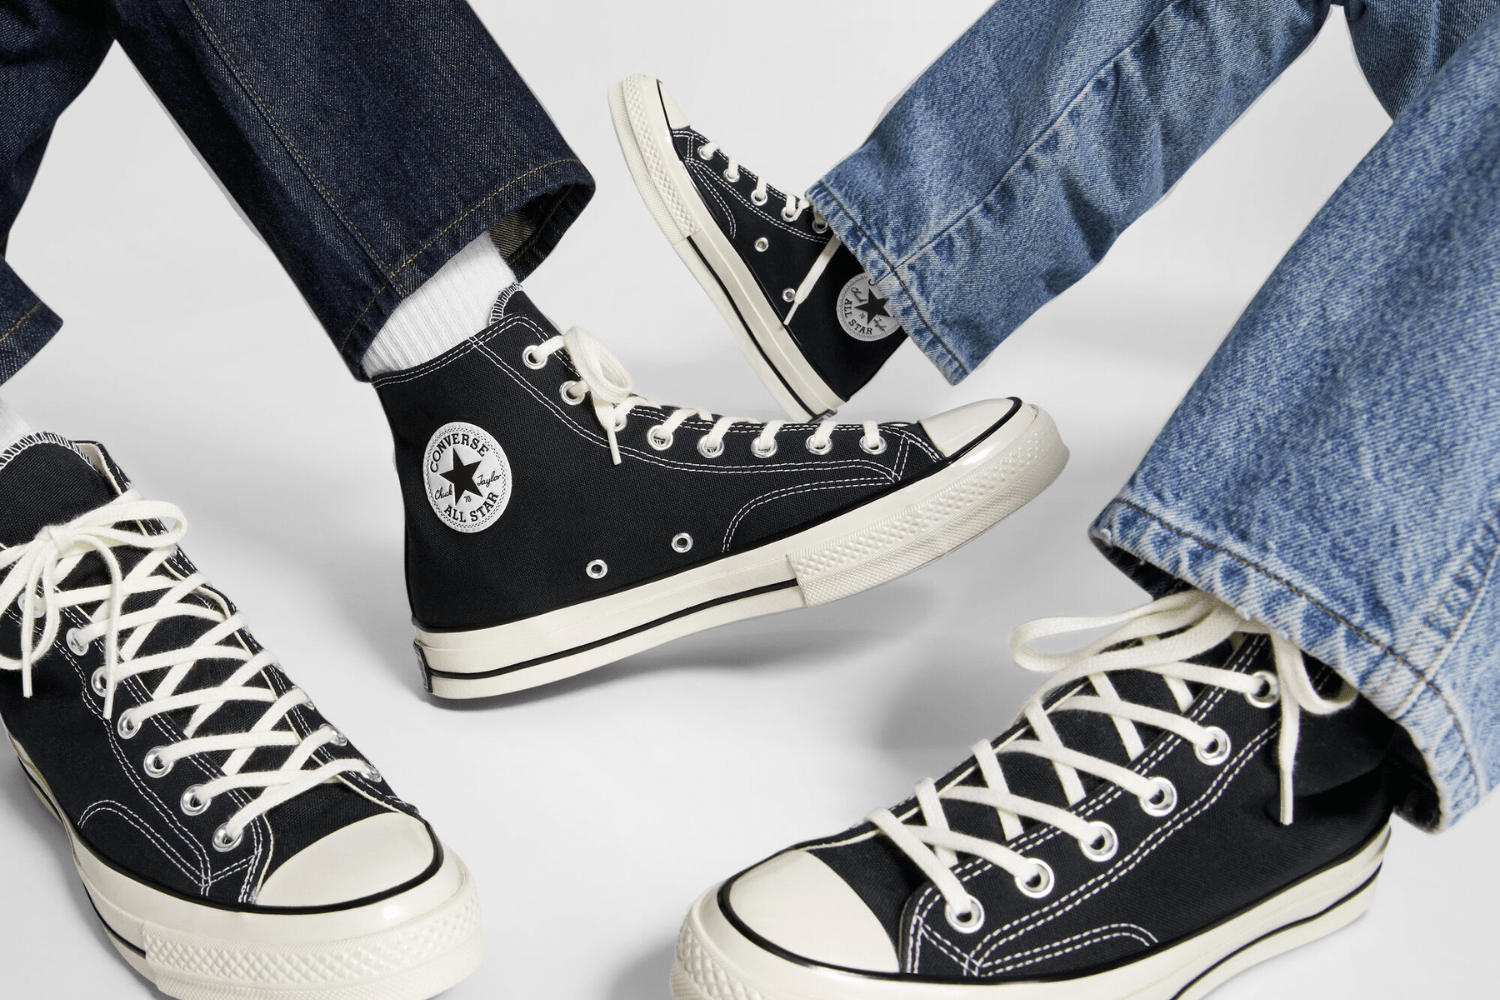 Converse Back to School sale comes with high discounts